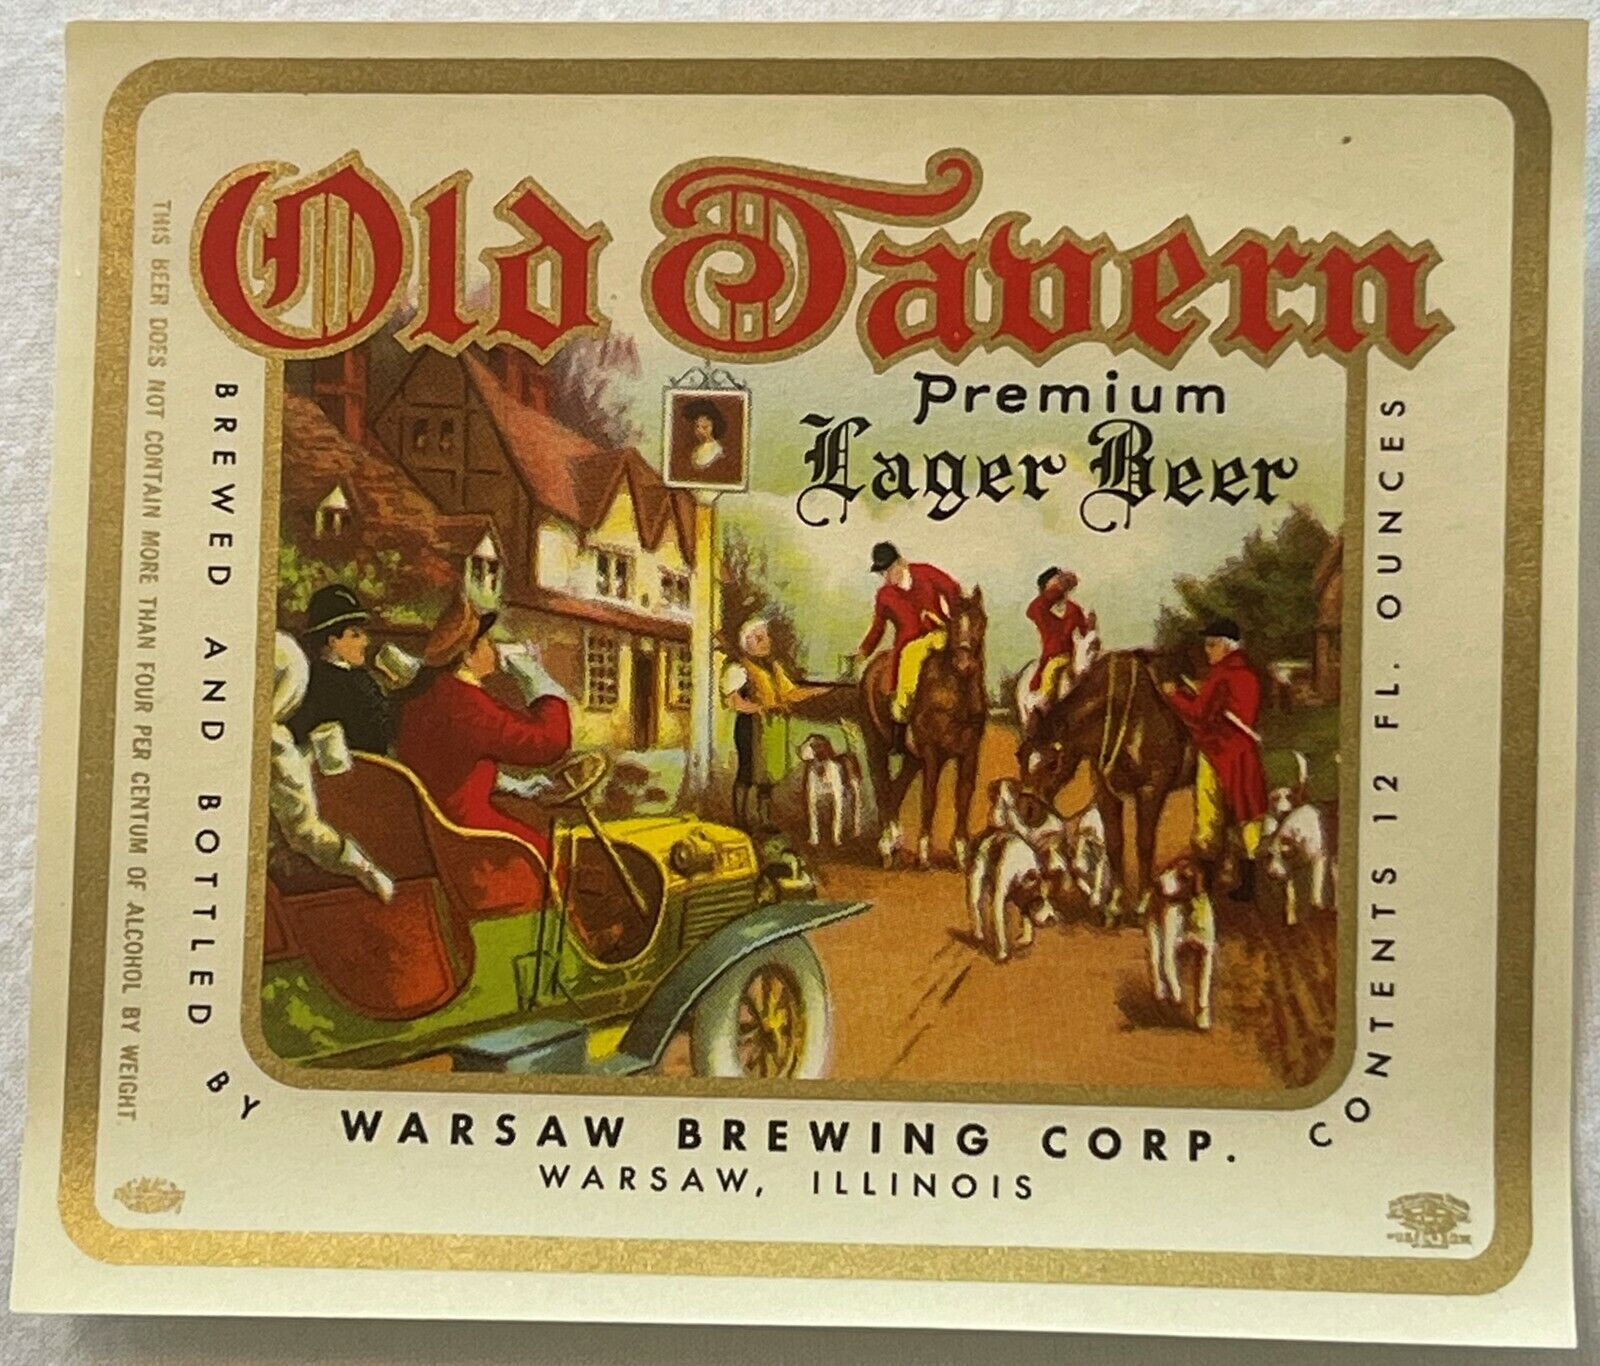 Vintage 1940s Old Tavern Lager Beer Label, Warsaw, IL - Drinking While Driving?